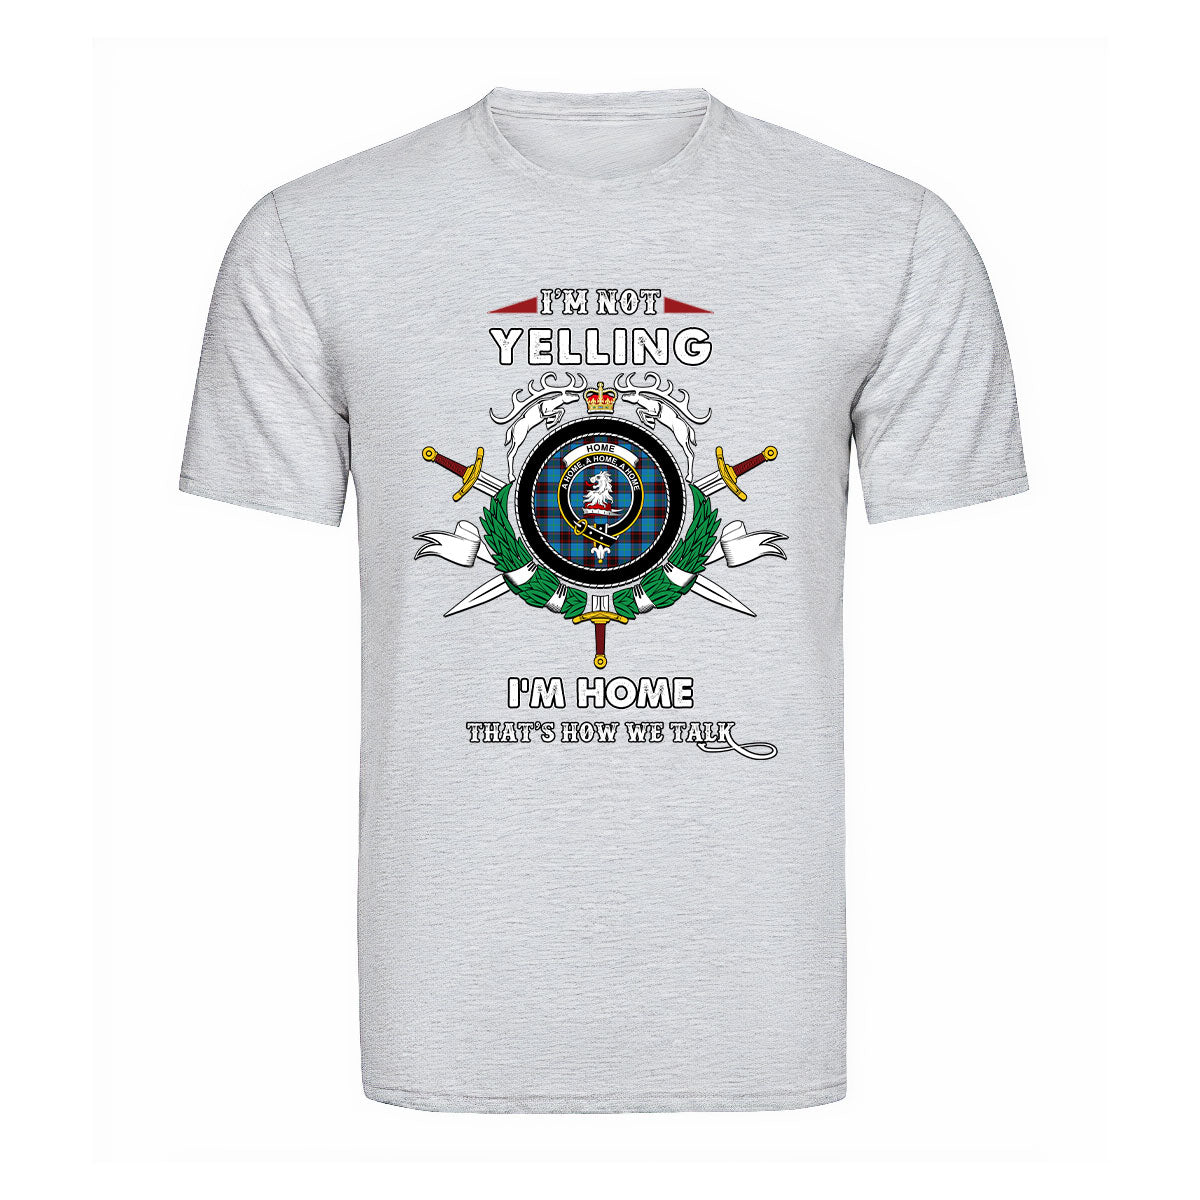 Home (or Hume) Tartan Crest T-shirt - I'm not yelling style